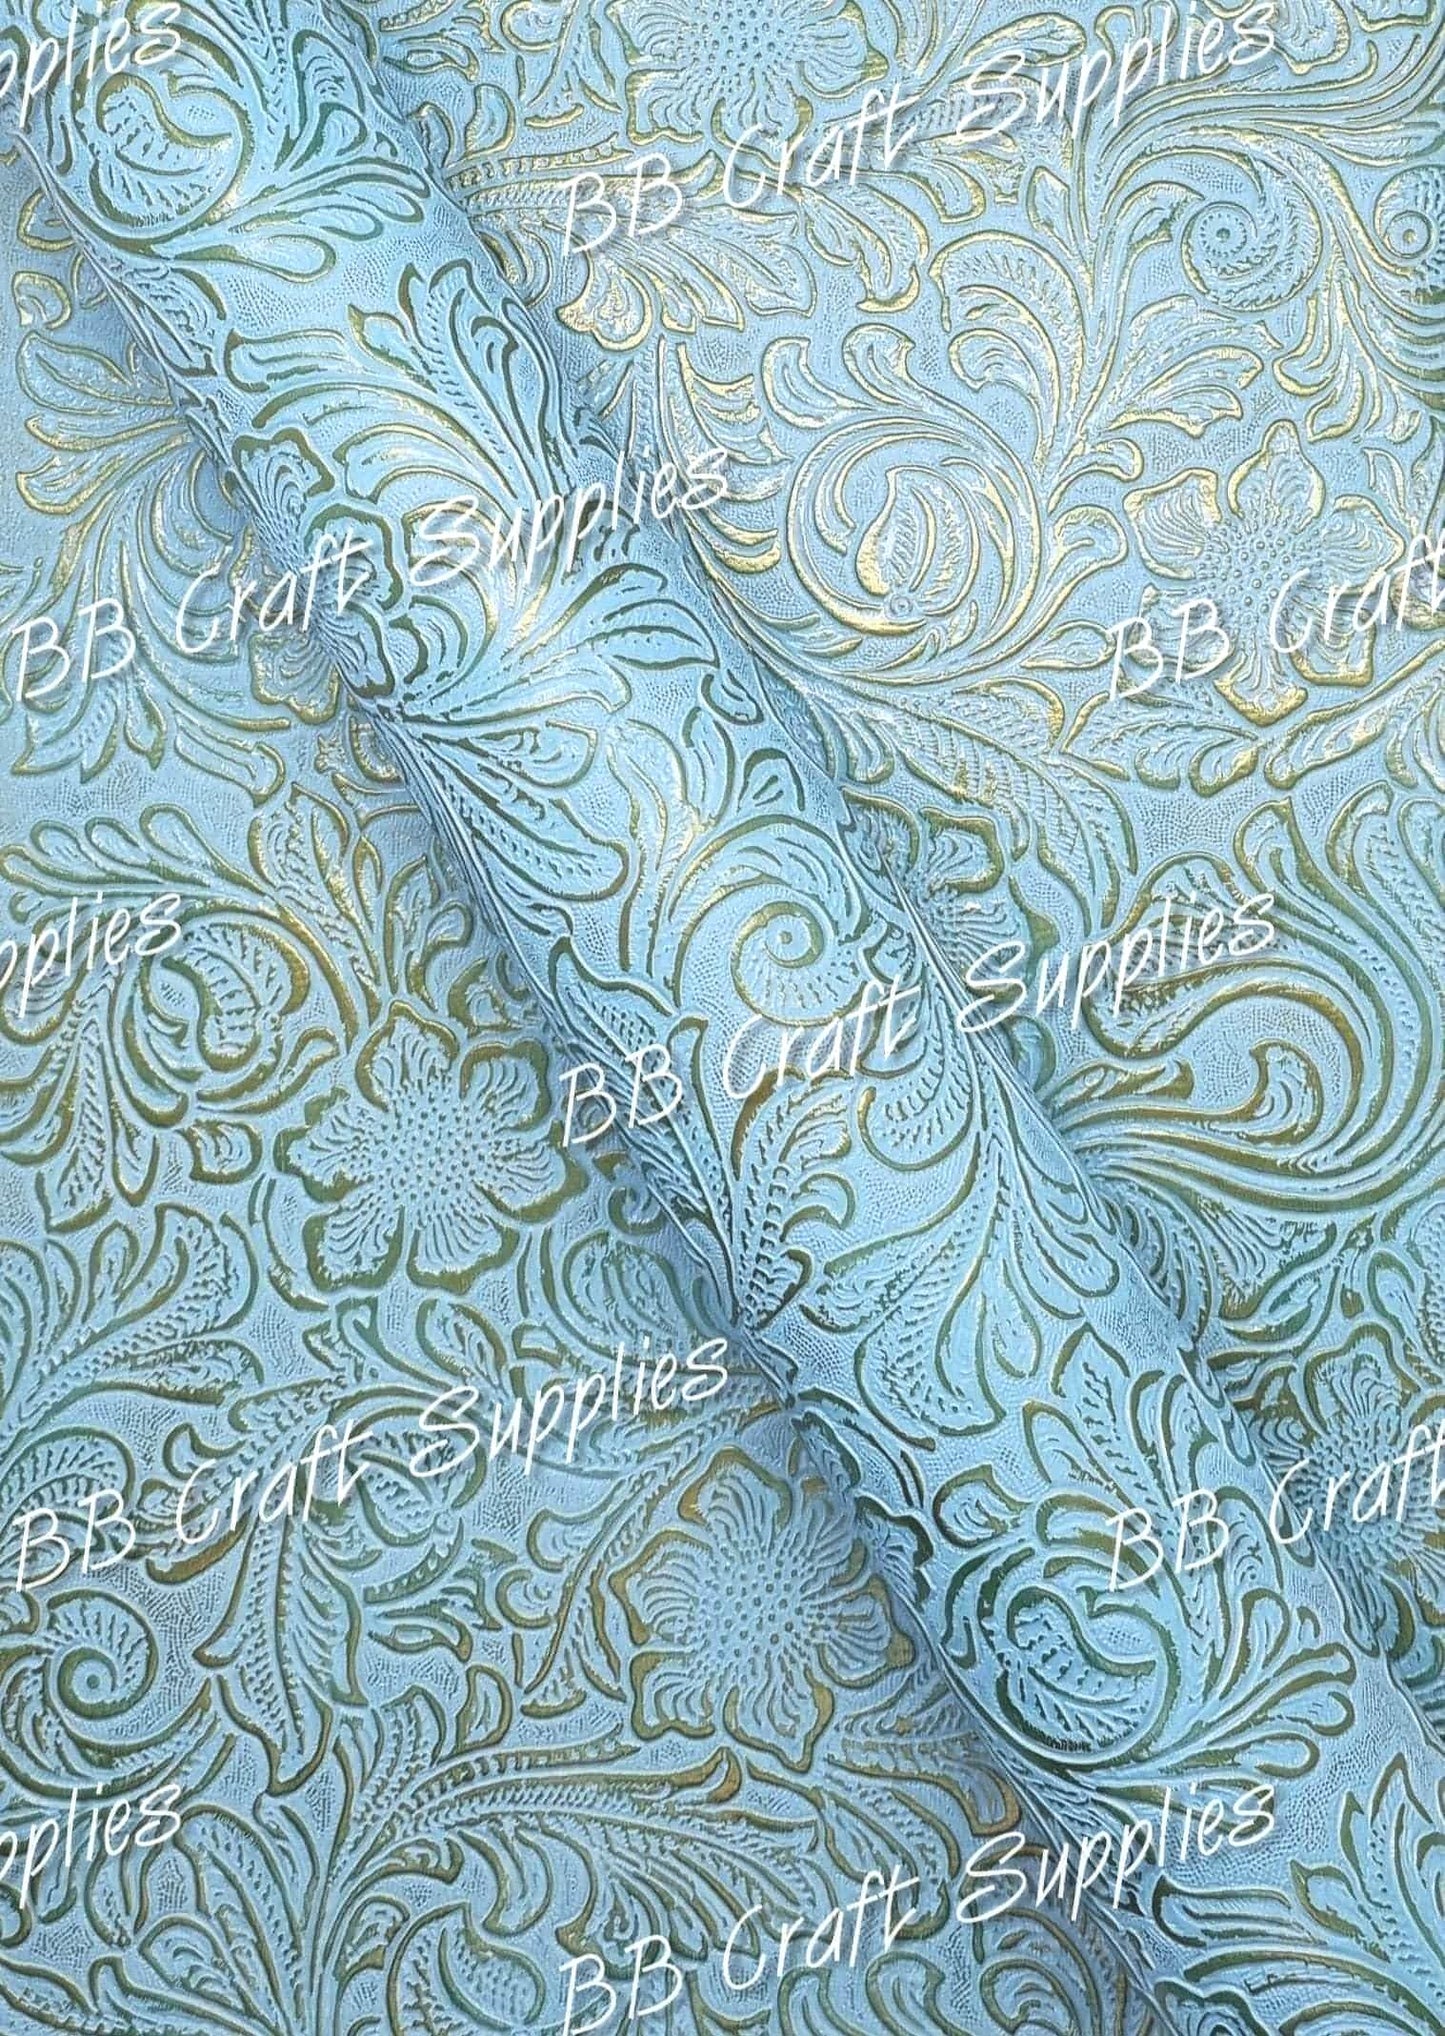 Embossed Floral Bloom Blue - embossed, Faux, Faux Leather, Floral, Leather, leatherette, metallic, Whats new - Bare Butler Faux Leather Supplies 